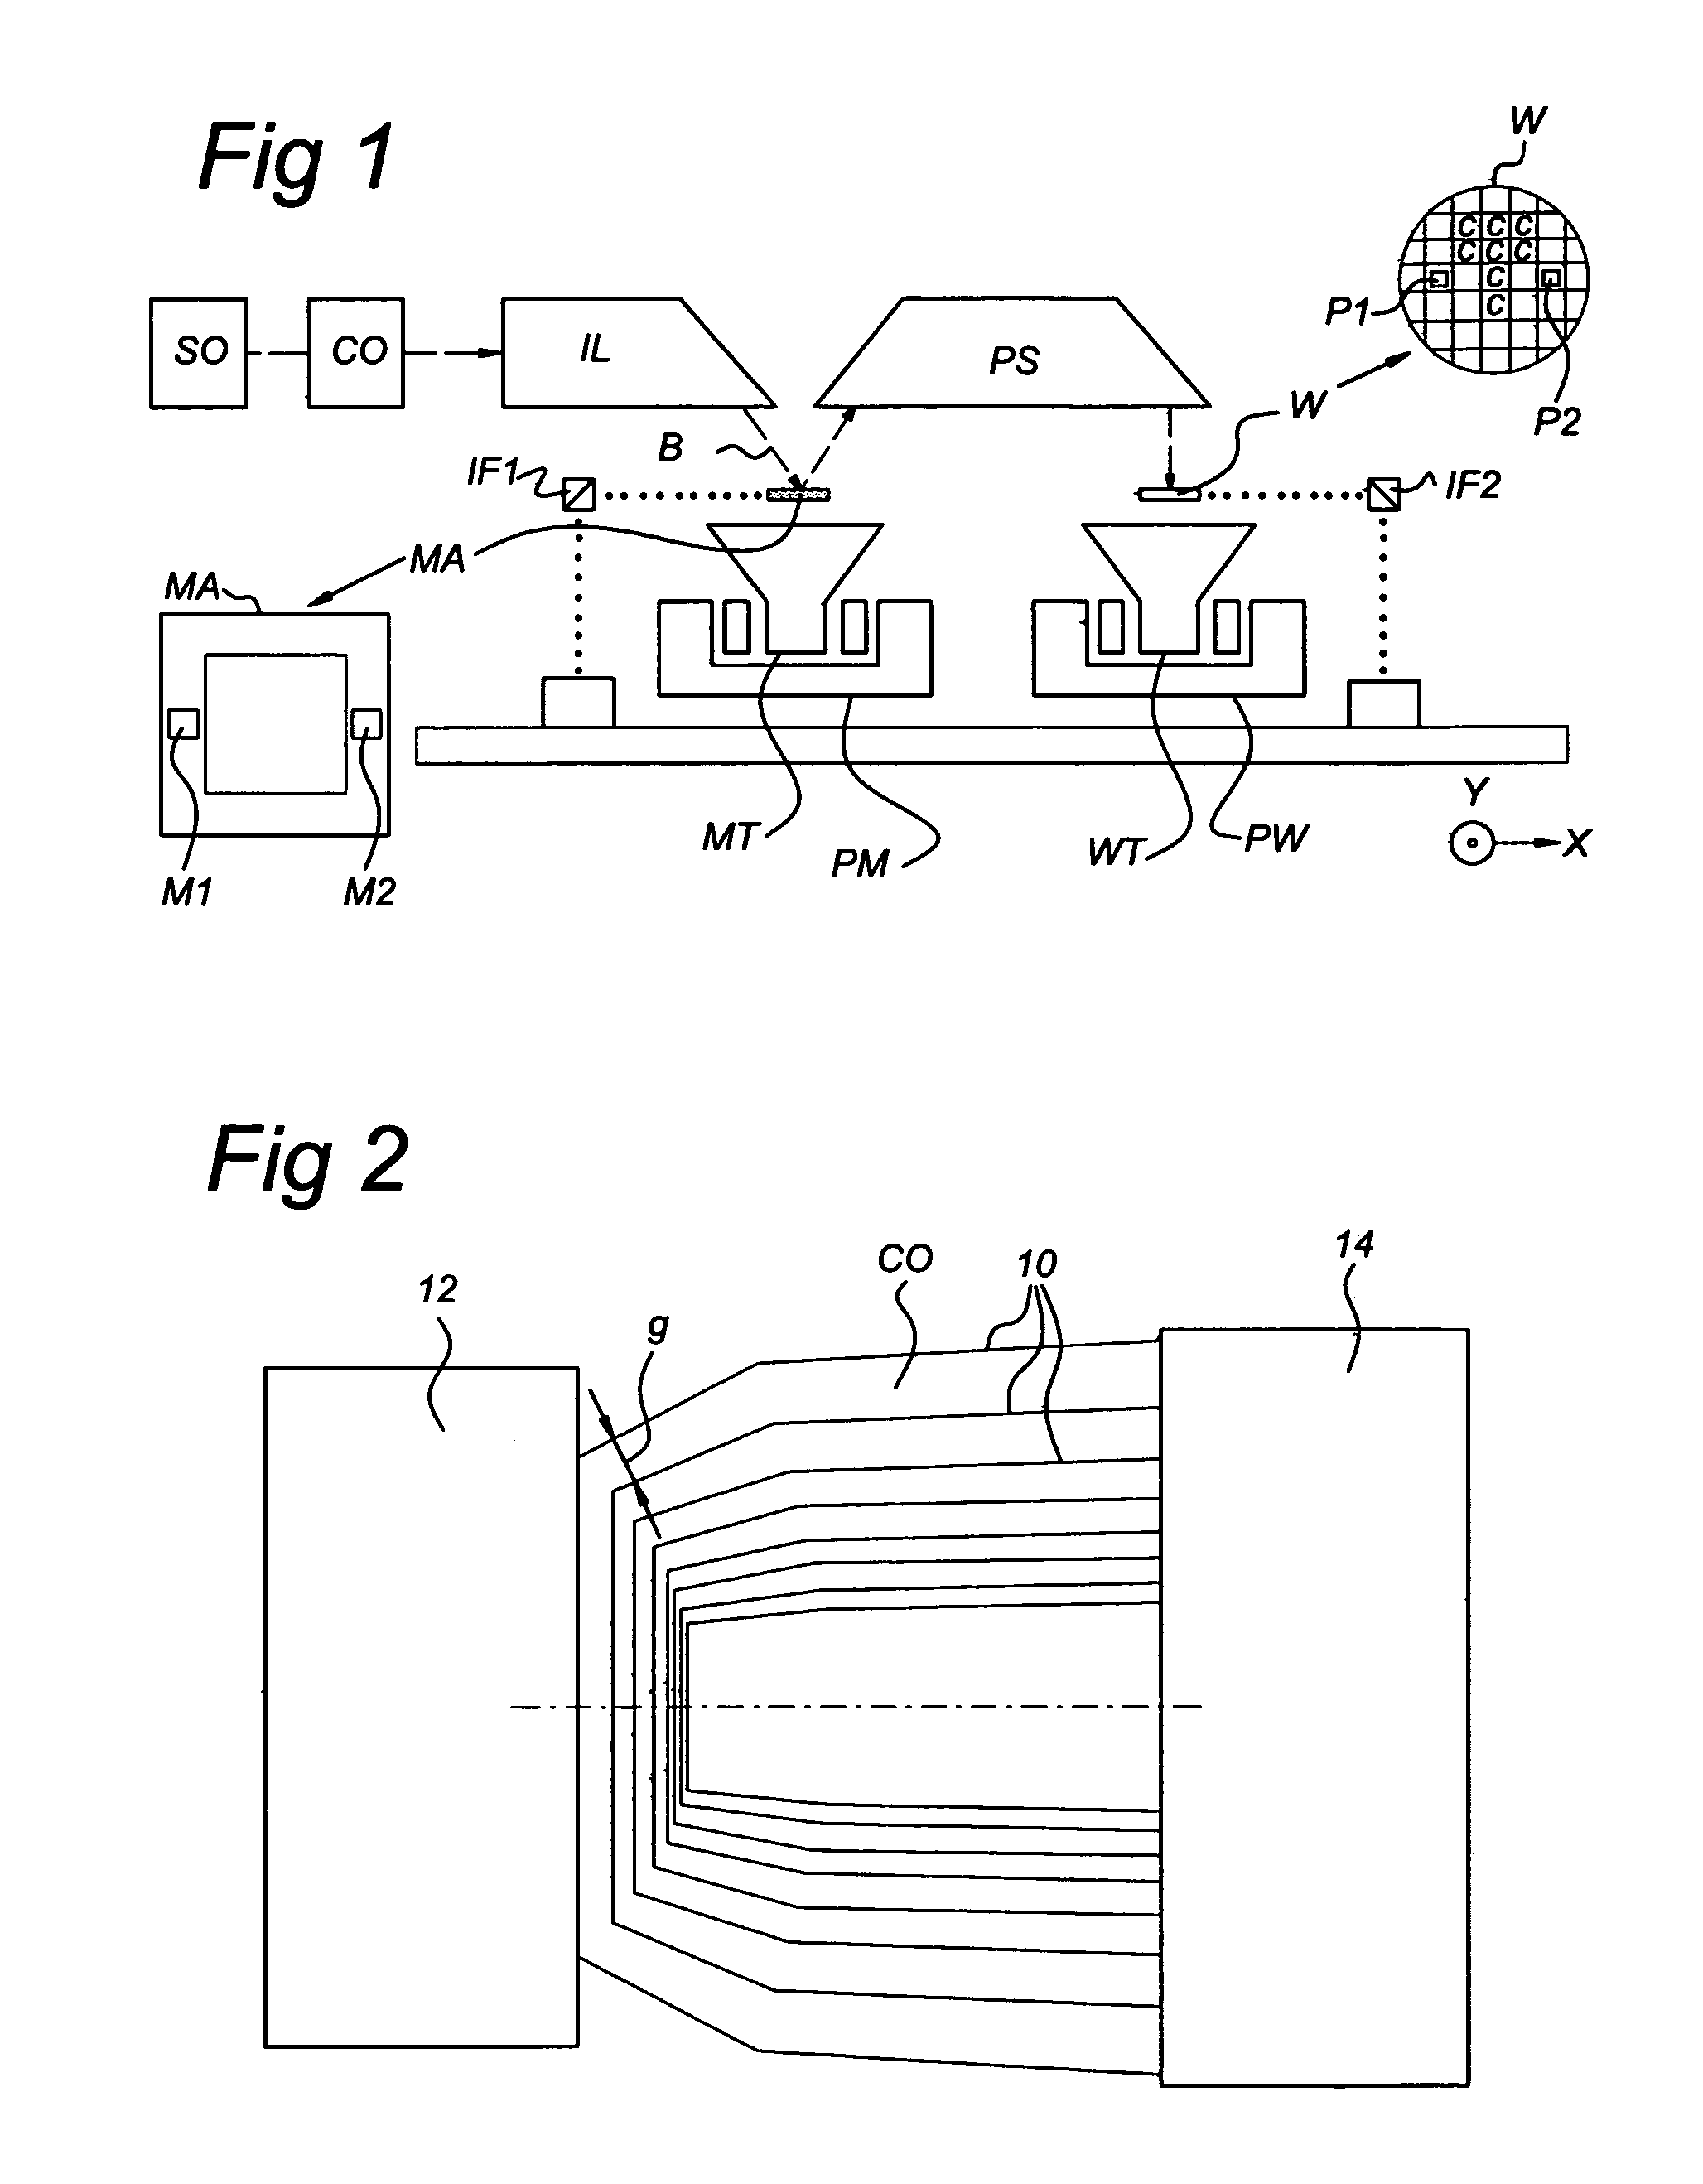 Radical cleaning arrangement for a lithographic apparatus